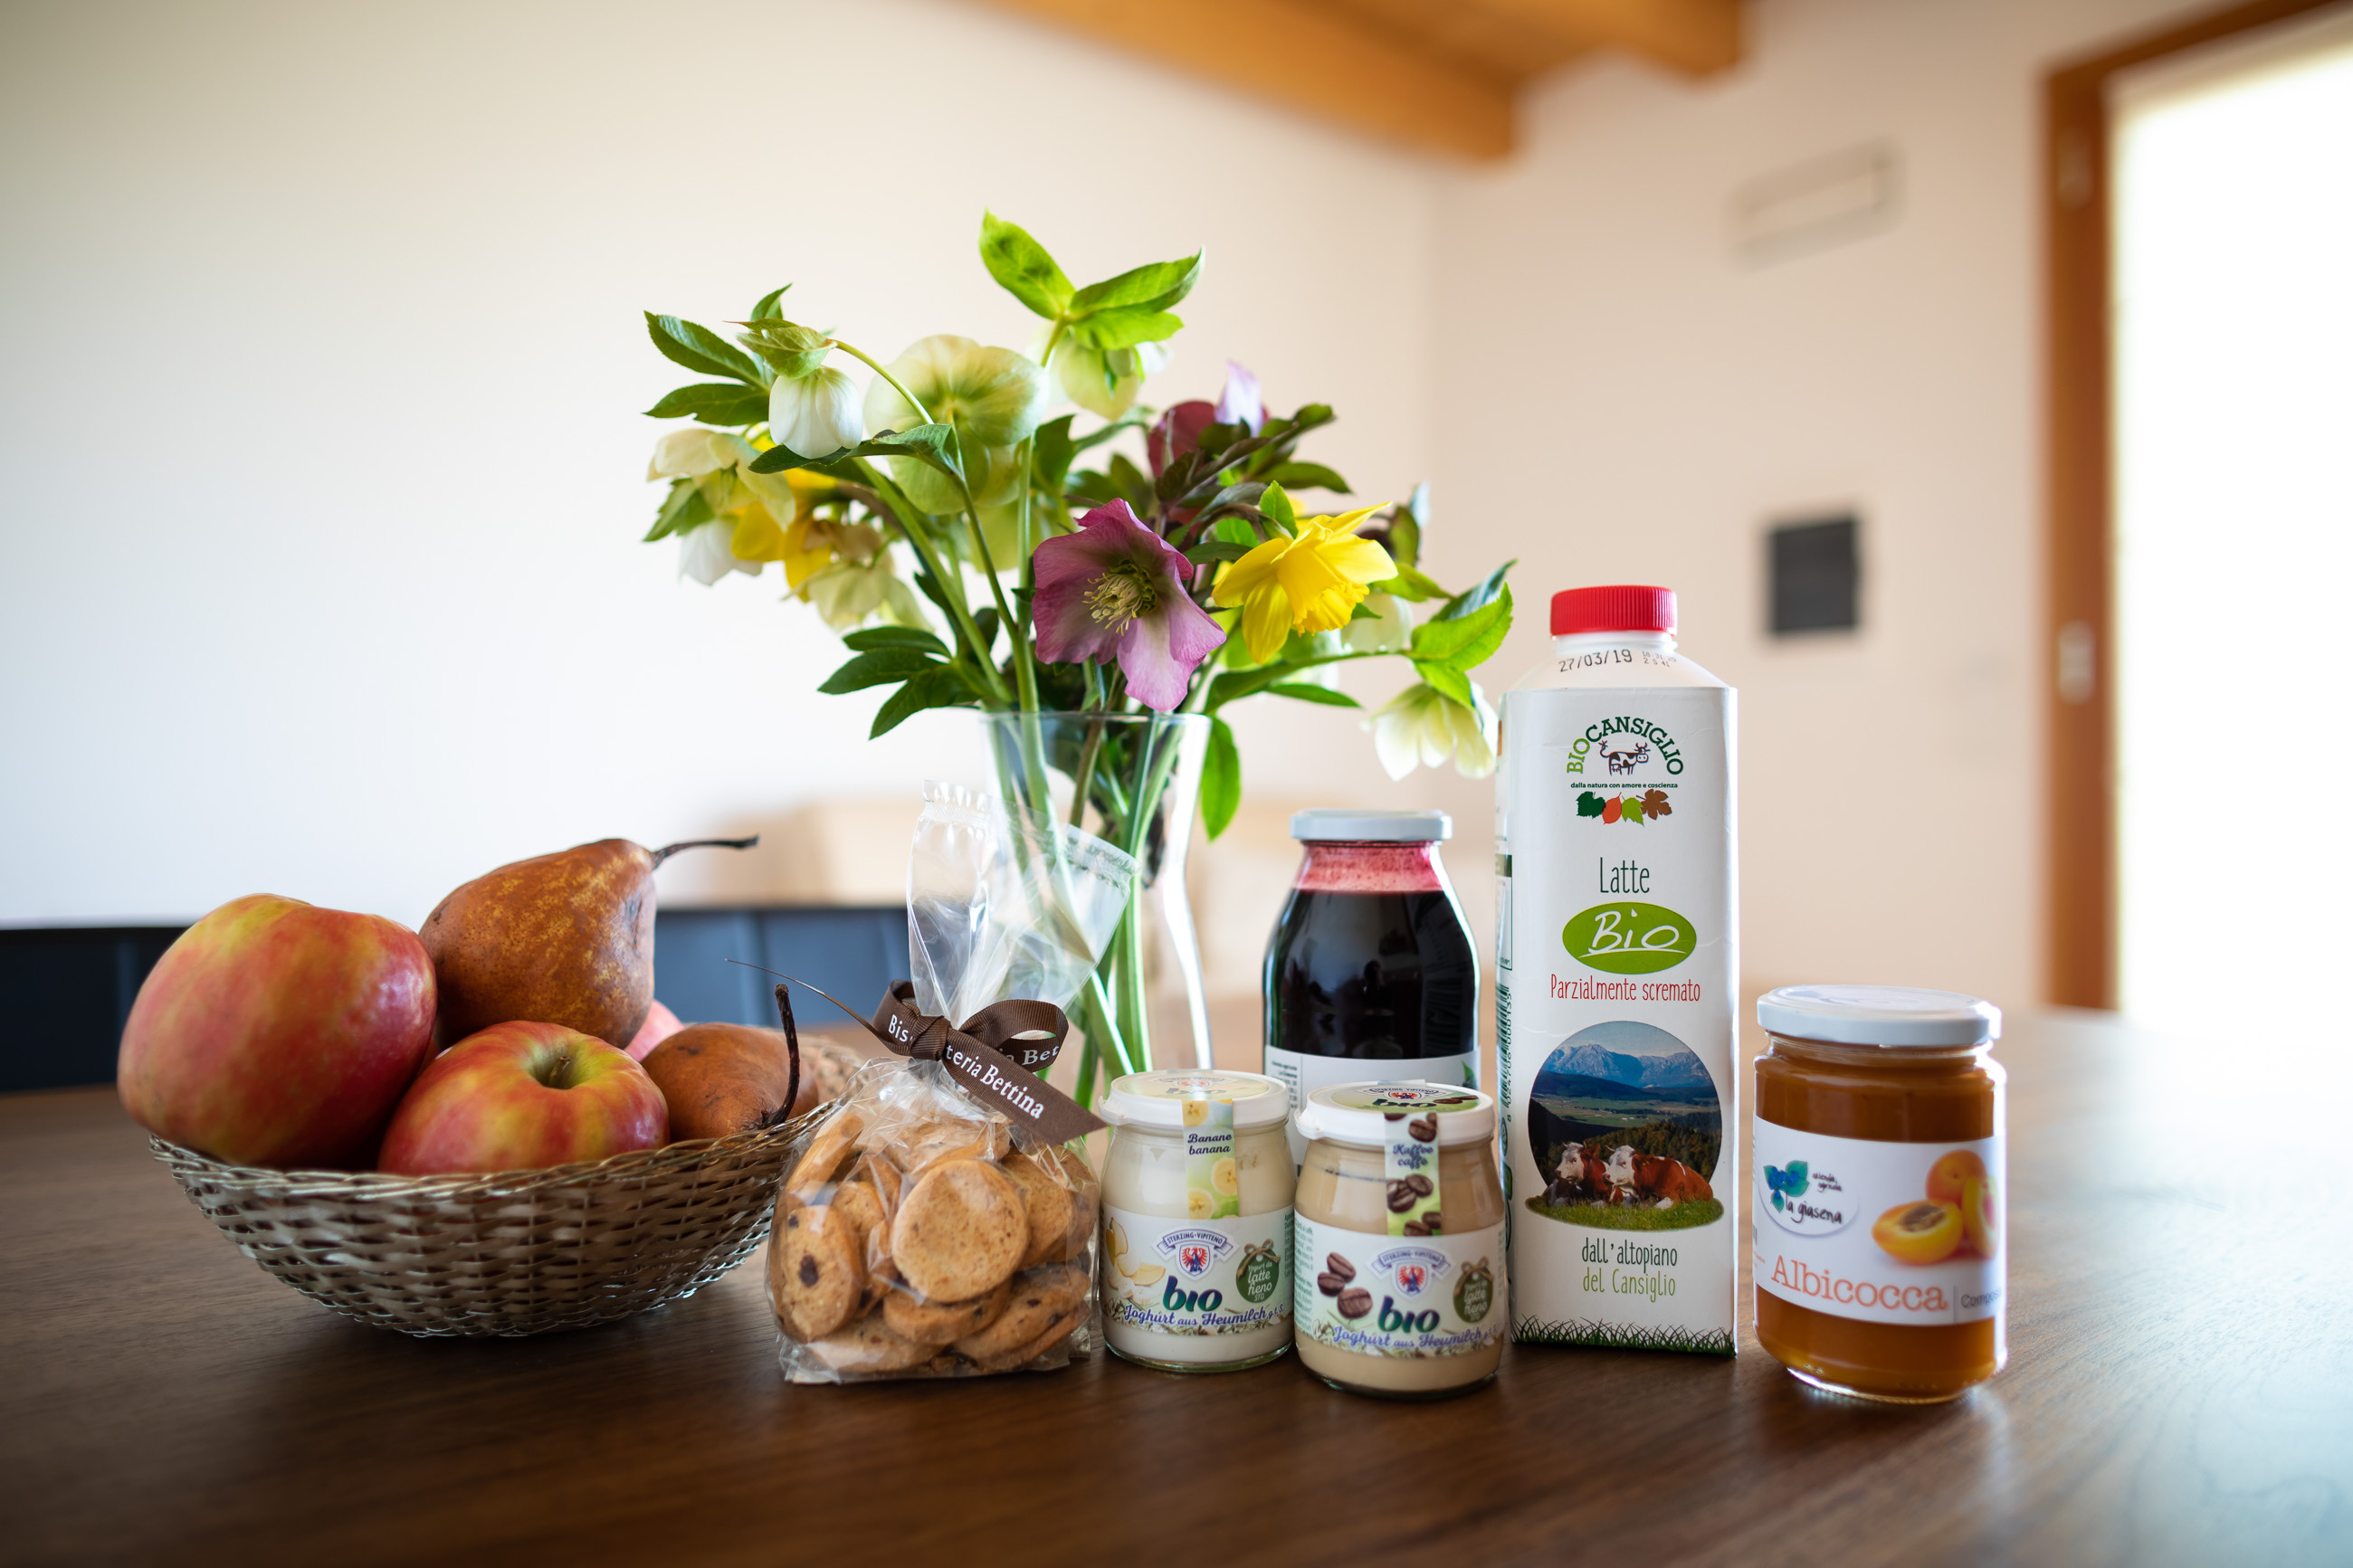 Local products at the eco-friendly house Casa Fiorindo: Artisanl Biscuit, compote, organic milk, fruits